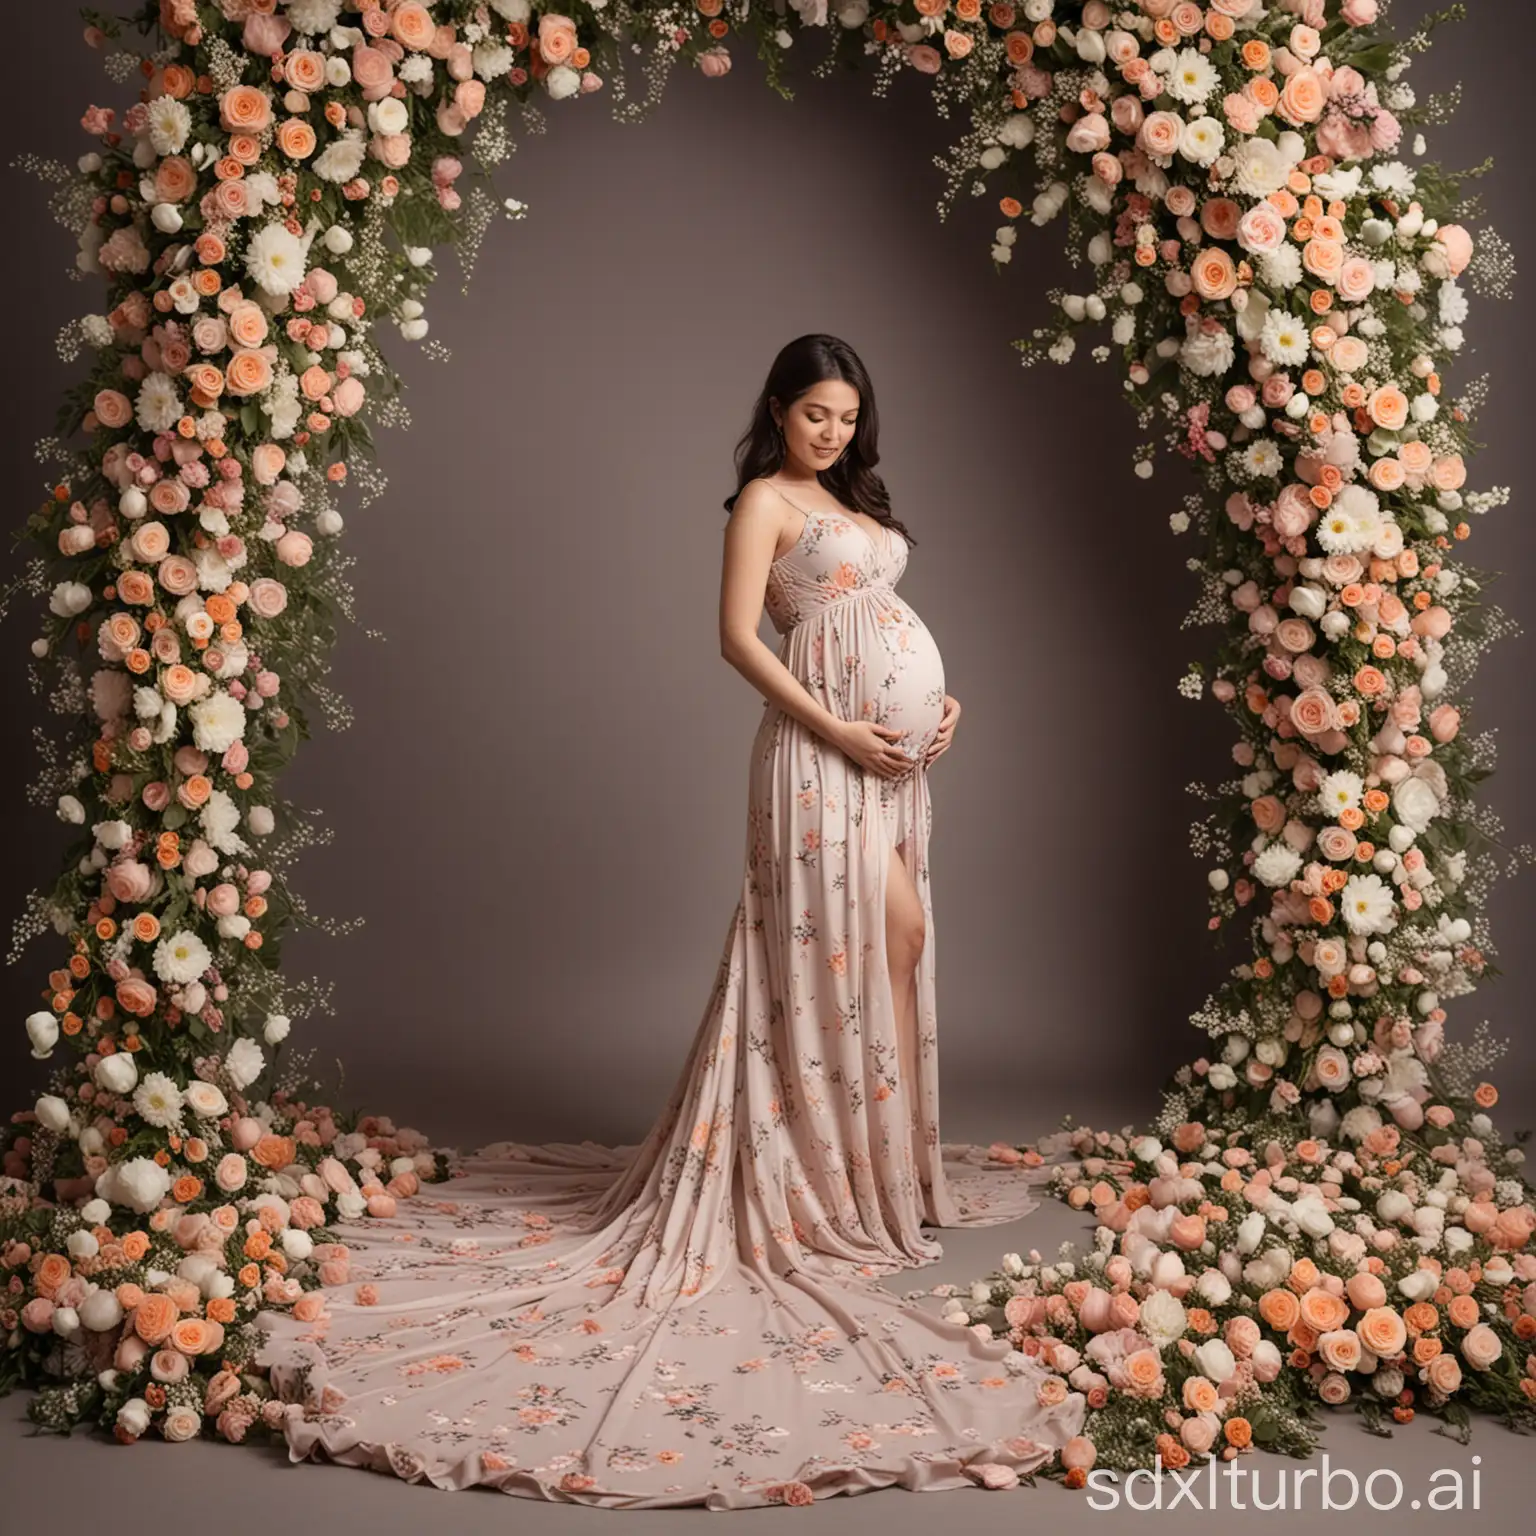 Maternity-Lady-in-Floral-Gown-at-Elegant-Studio-with-Flowers-Backdrop